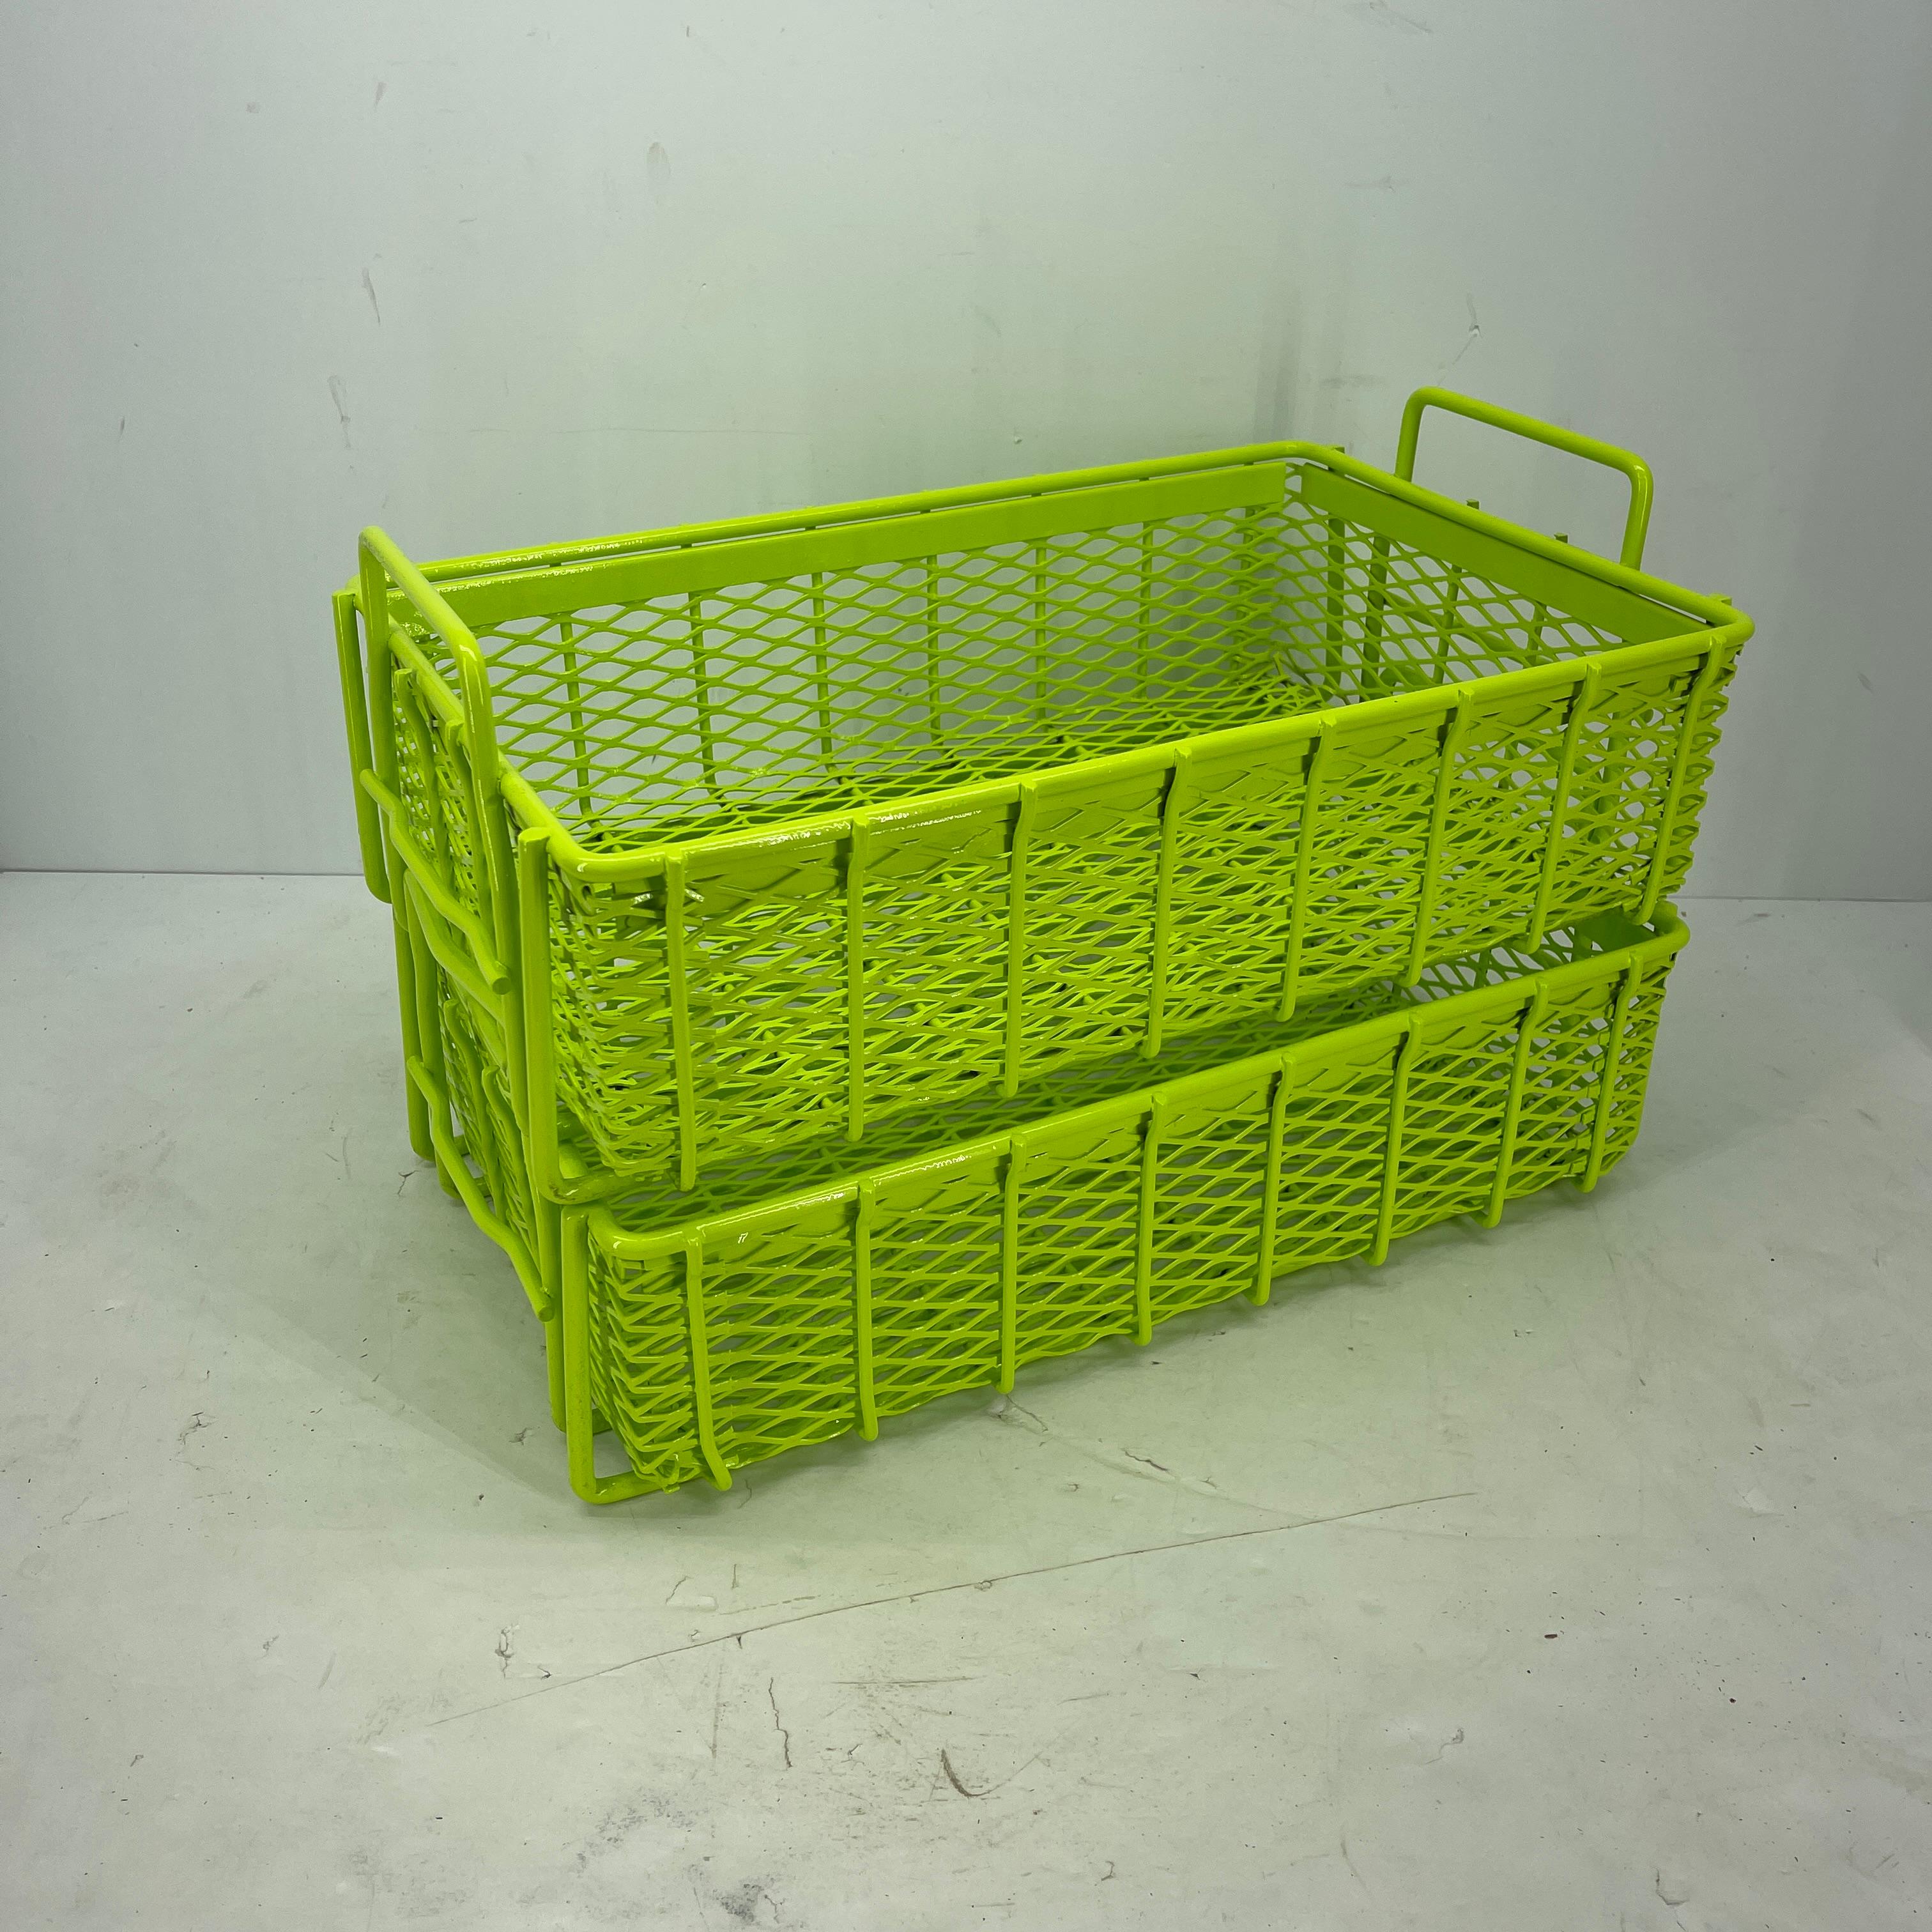 Industrial era steel stackable bins with handles. Freshly powder coated in bright chartreuse.
The bins have endless uses; in an office, mud room, hallway or an office. The beautiful heavy-duty, functional and hand-crafted bins are sturdy and ready